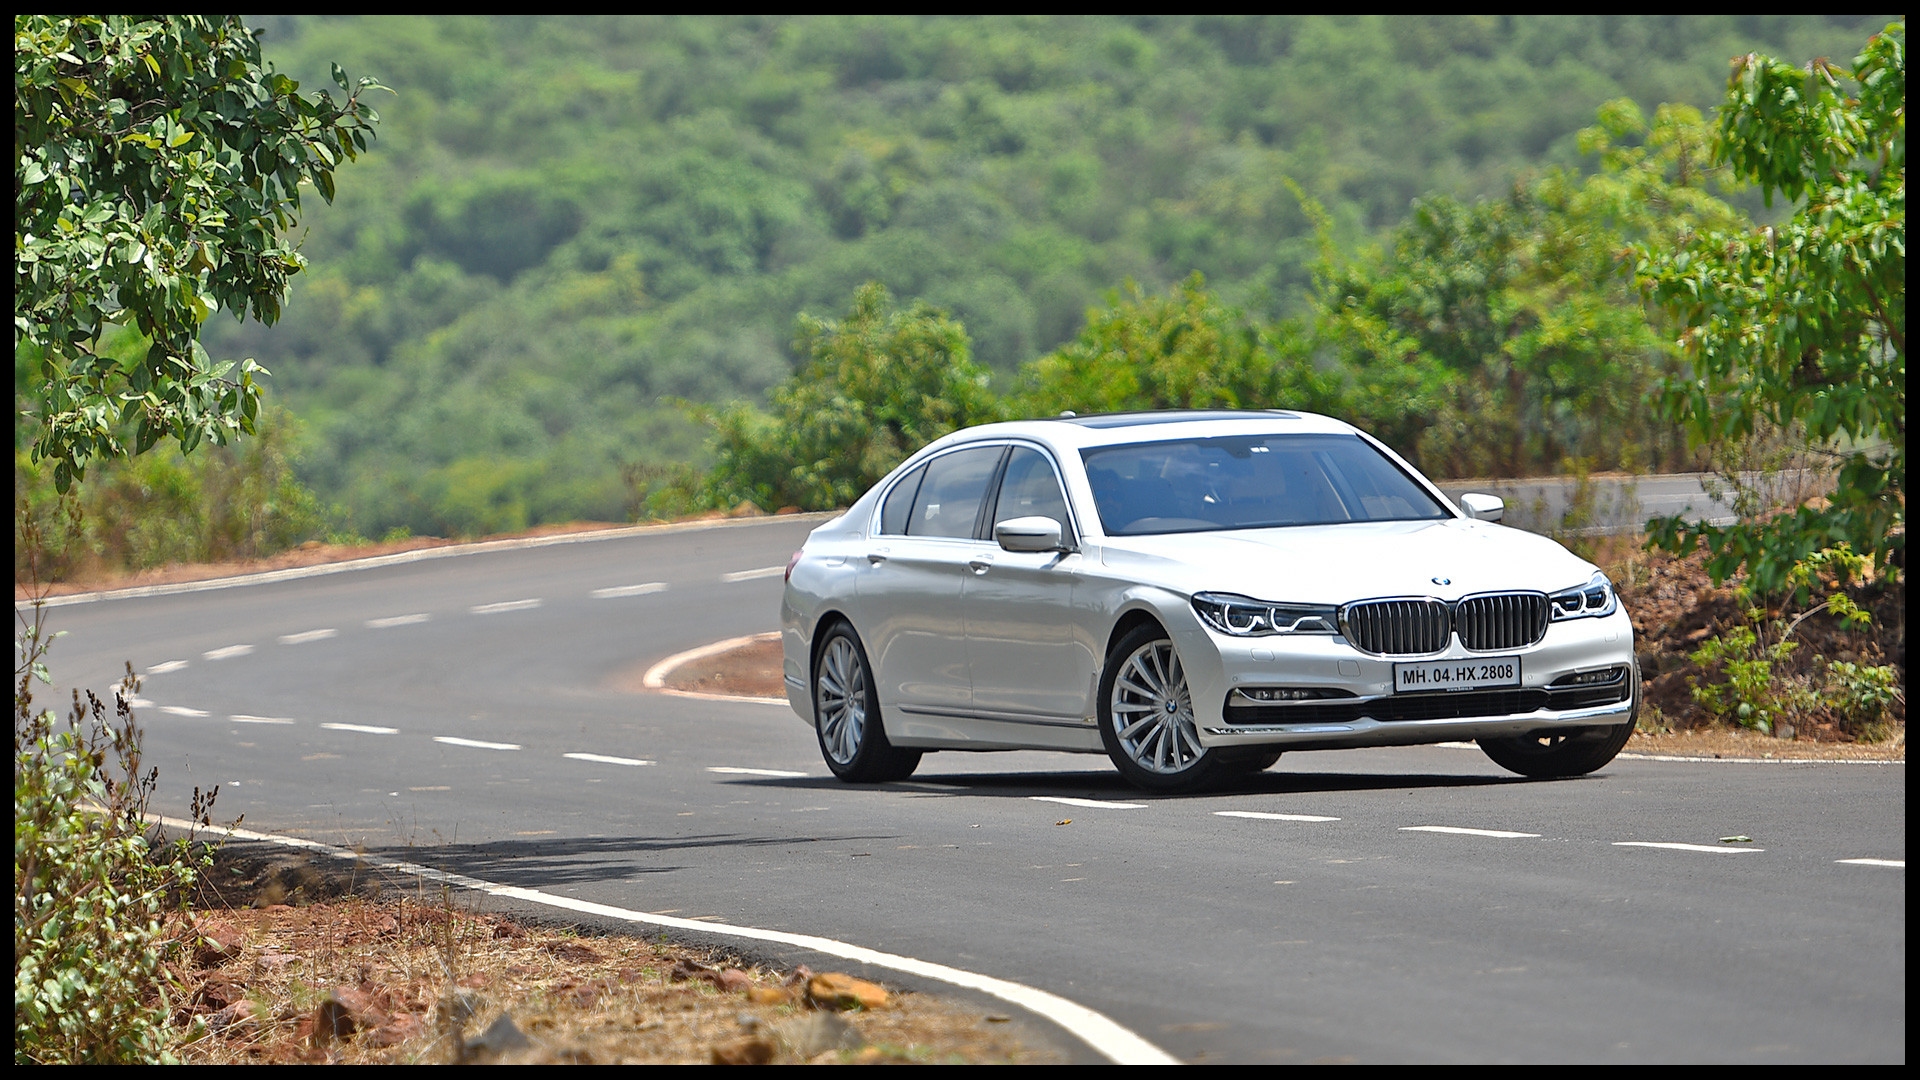 Bmw 7 Series 2017 Price Mileage Reviews Specification Gallery Cool Bmw 740i Wallpaper